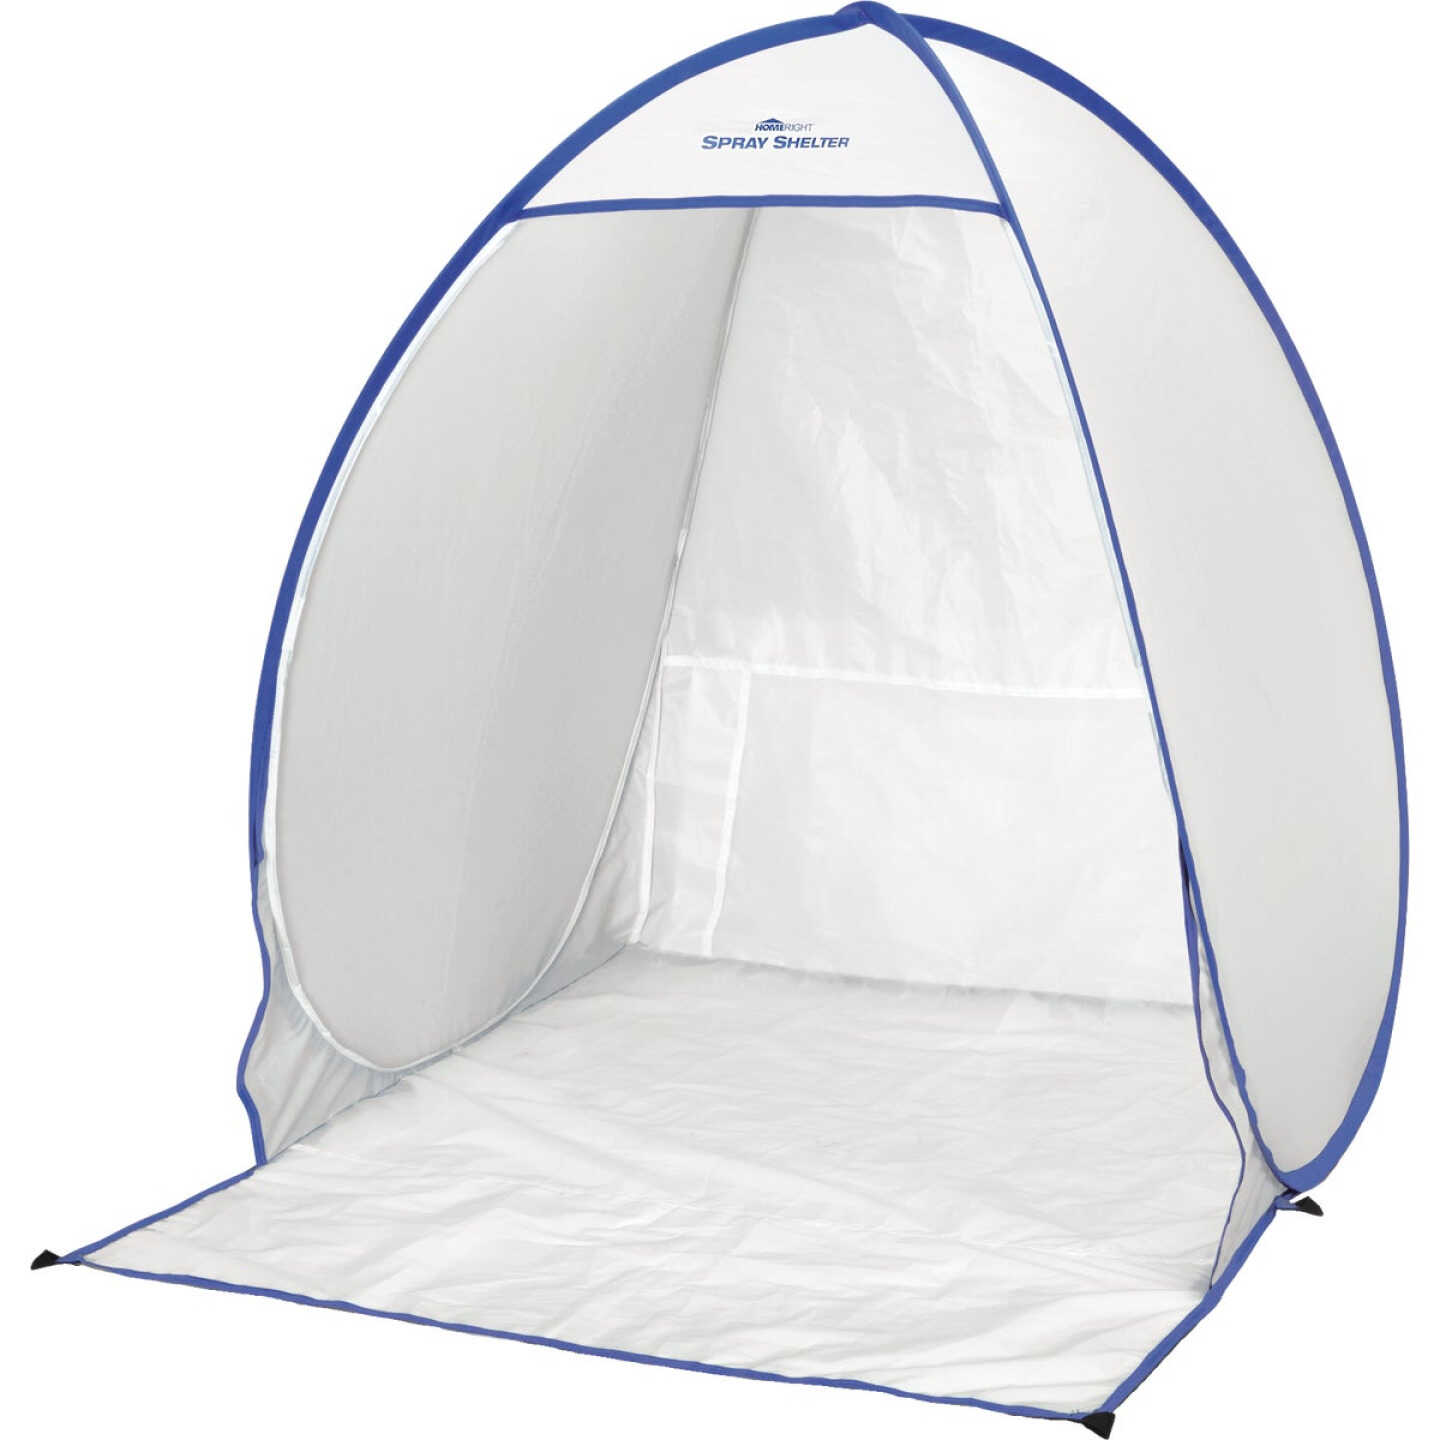 HomeRight Spray Shelter Large Spray Paint Tent Portable Paint Booth  Protector 